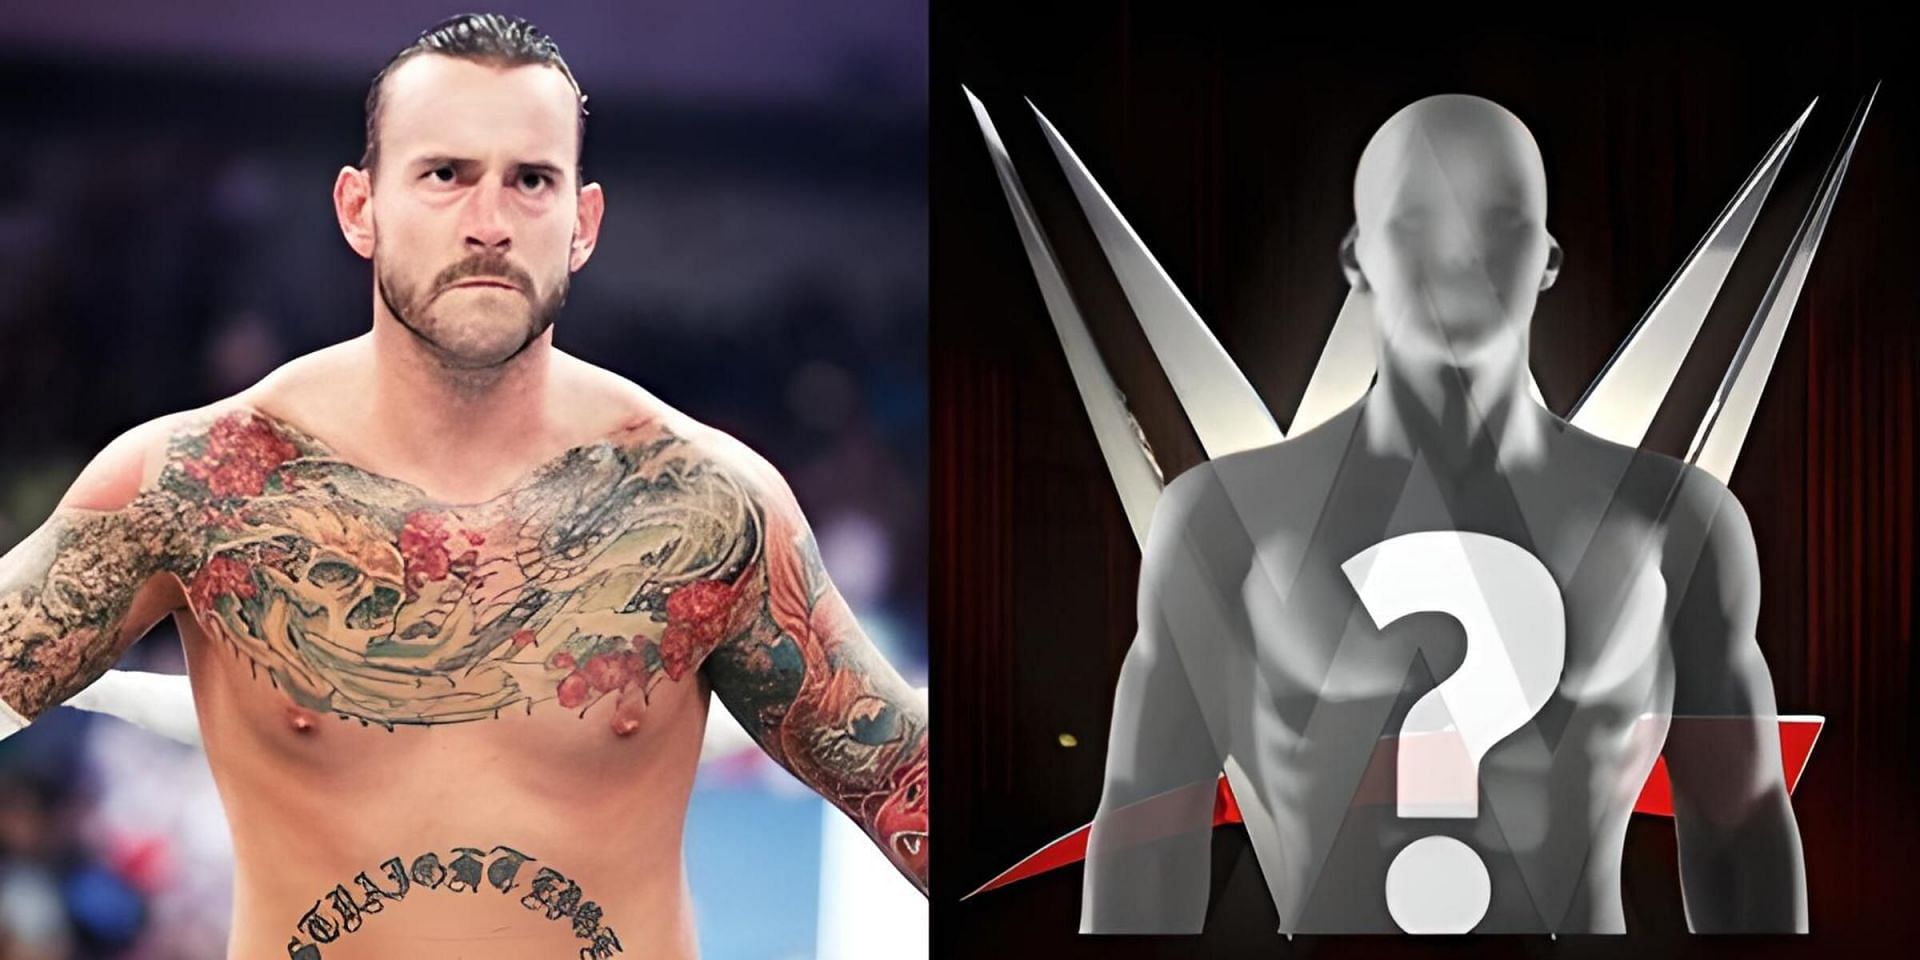 CM Punk earned massive fame during the &quot;Summer of Punk&quot; phase